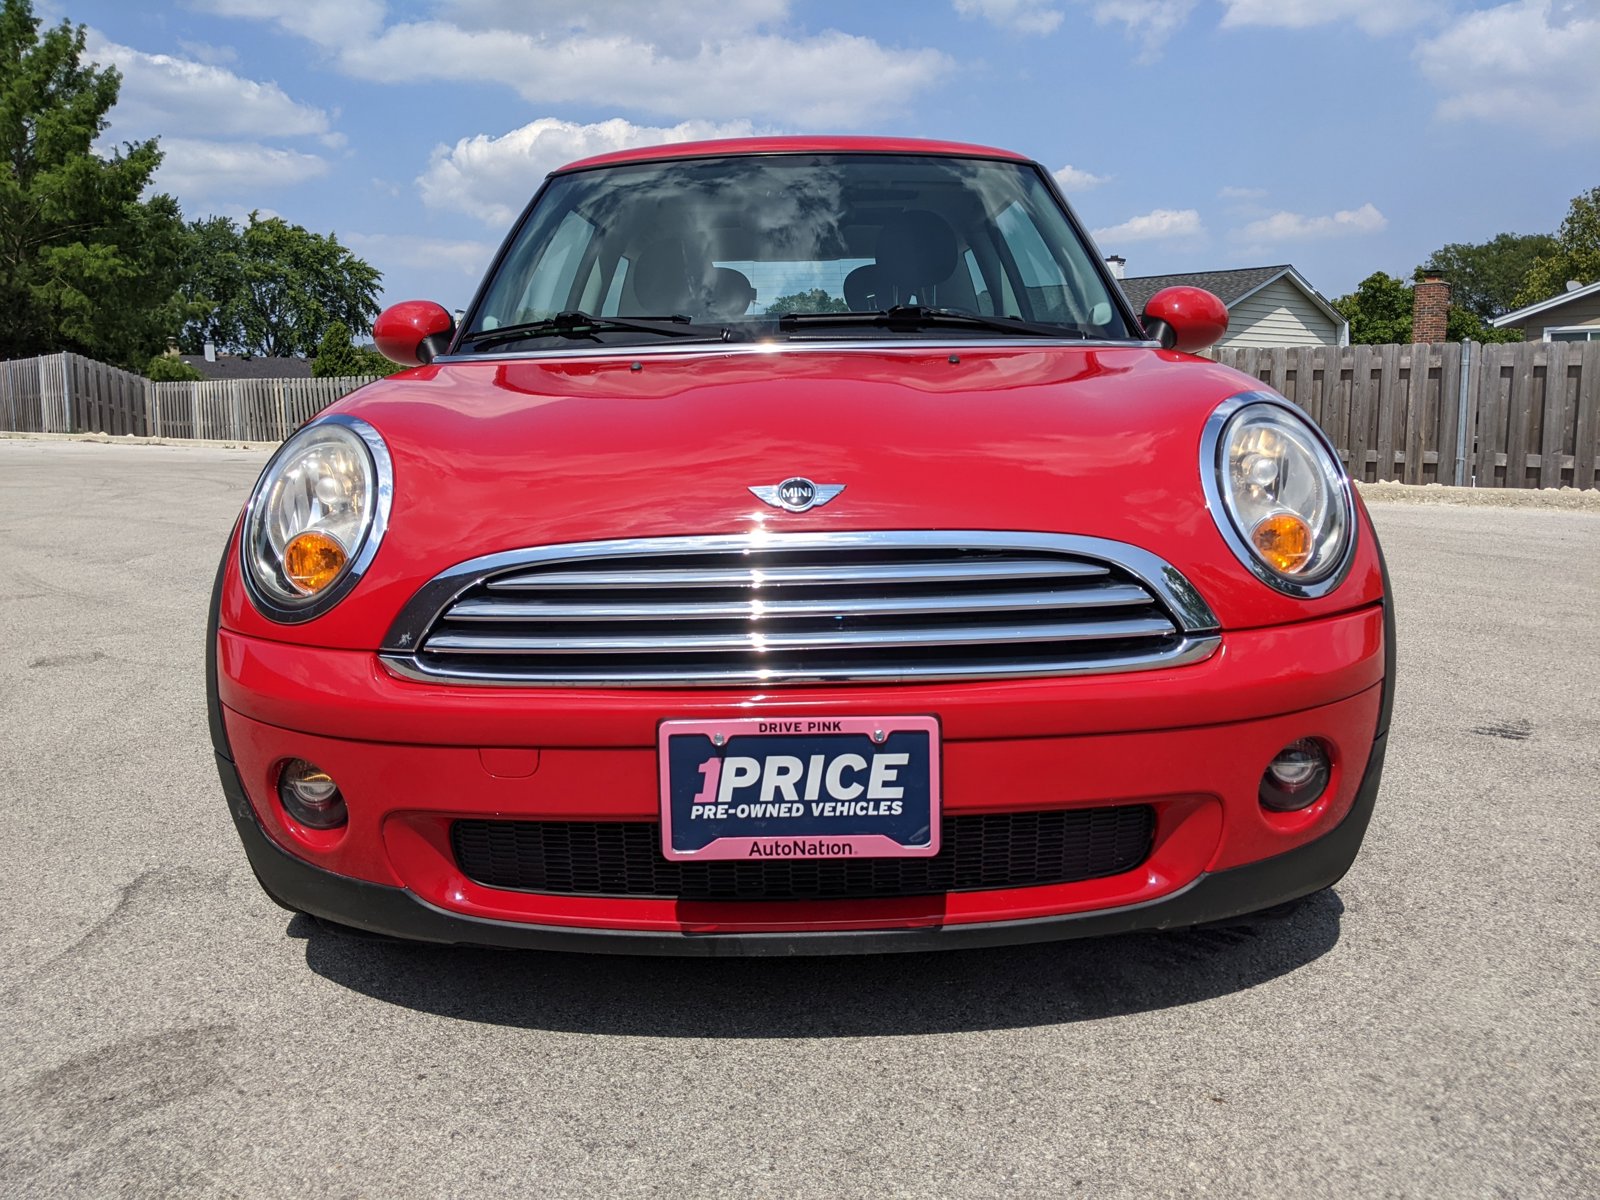 Used 2010 MINI Cooper Base with VIN WMWMF3C52ATZ61754 for sale in Des Plaines, IL